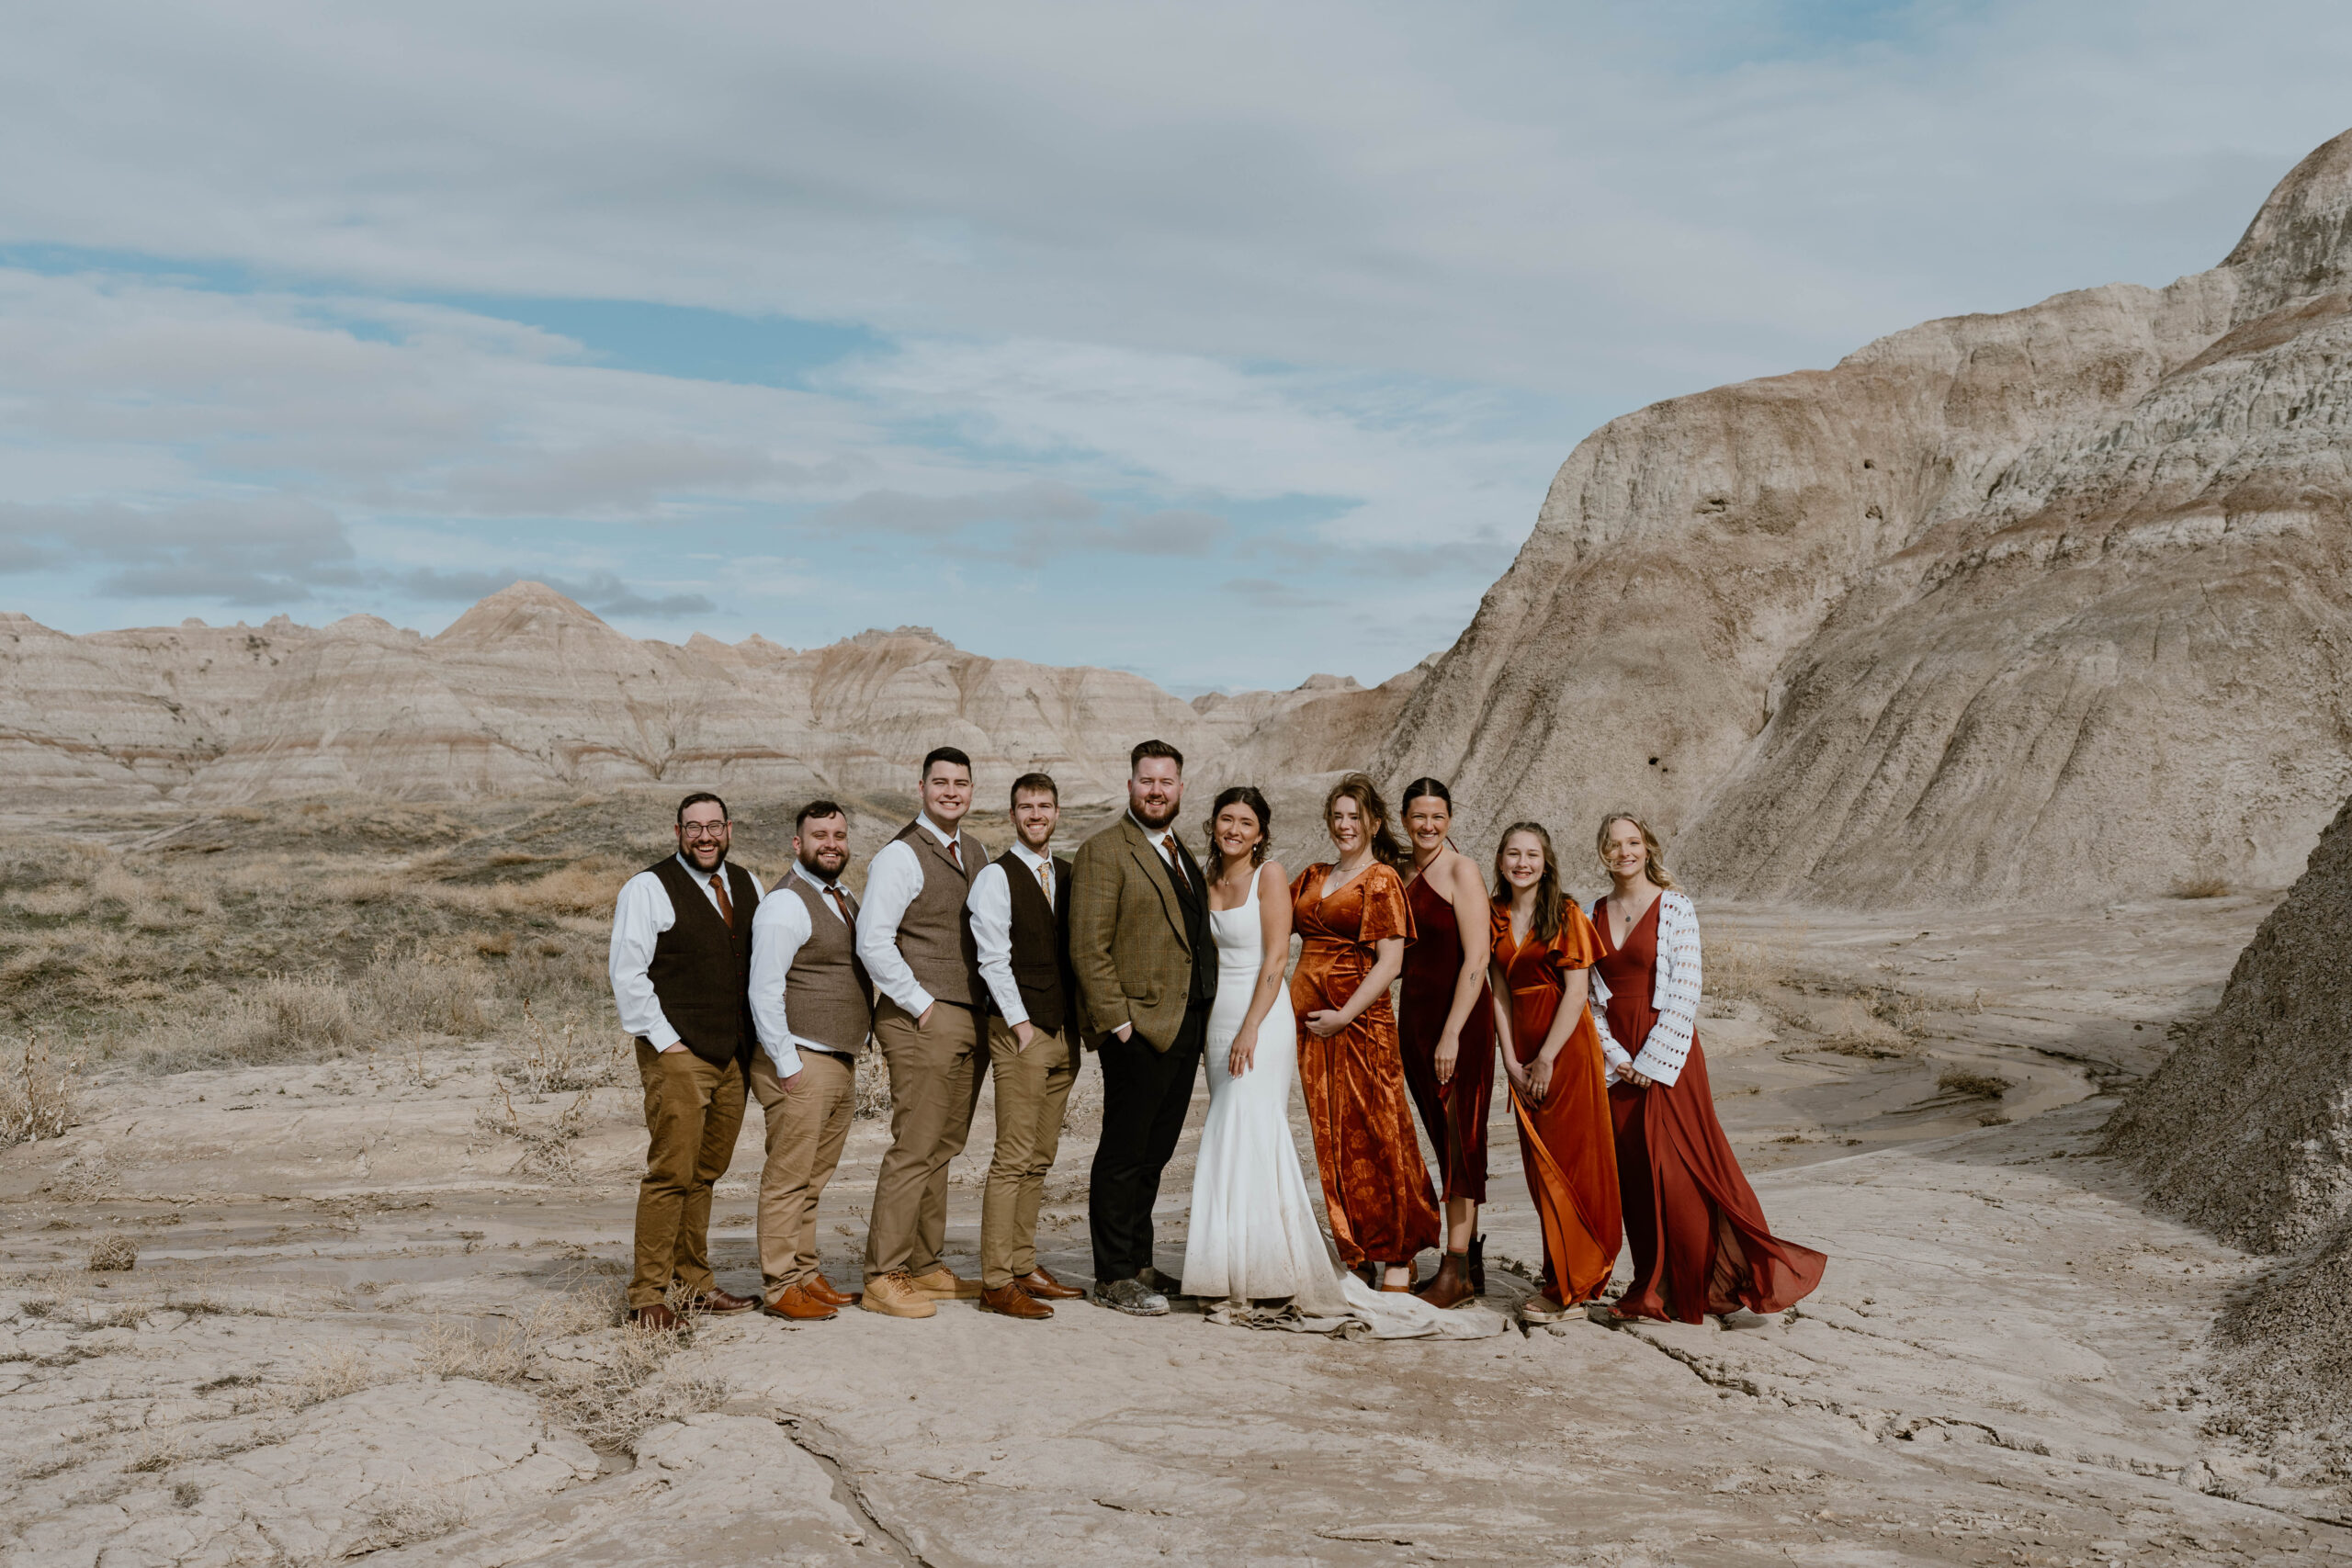 A wedding party poses for a photo in front of a canyon overlook